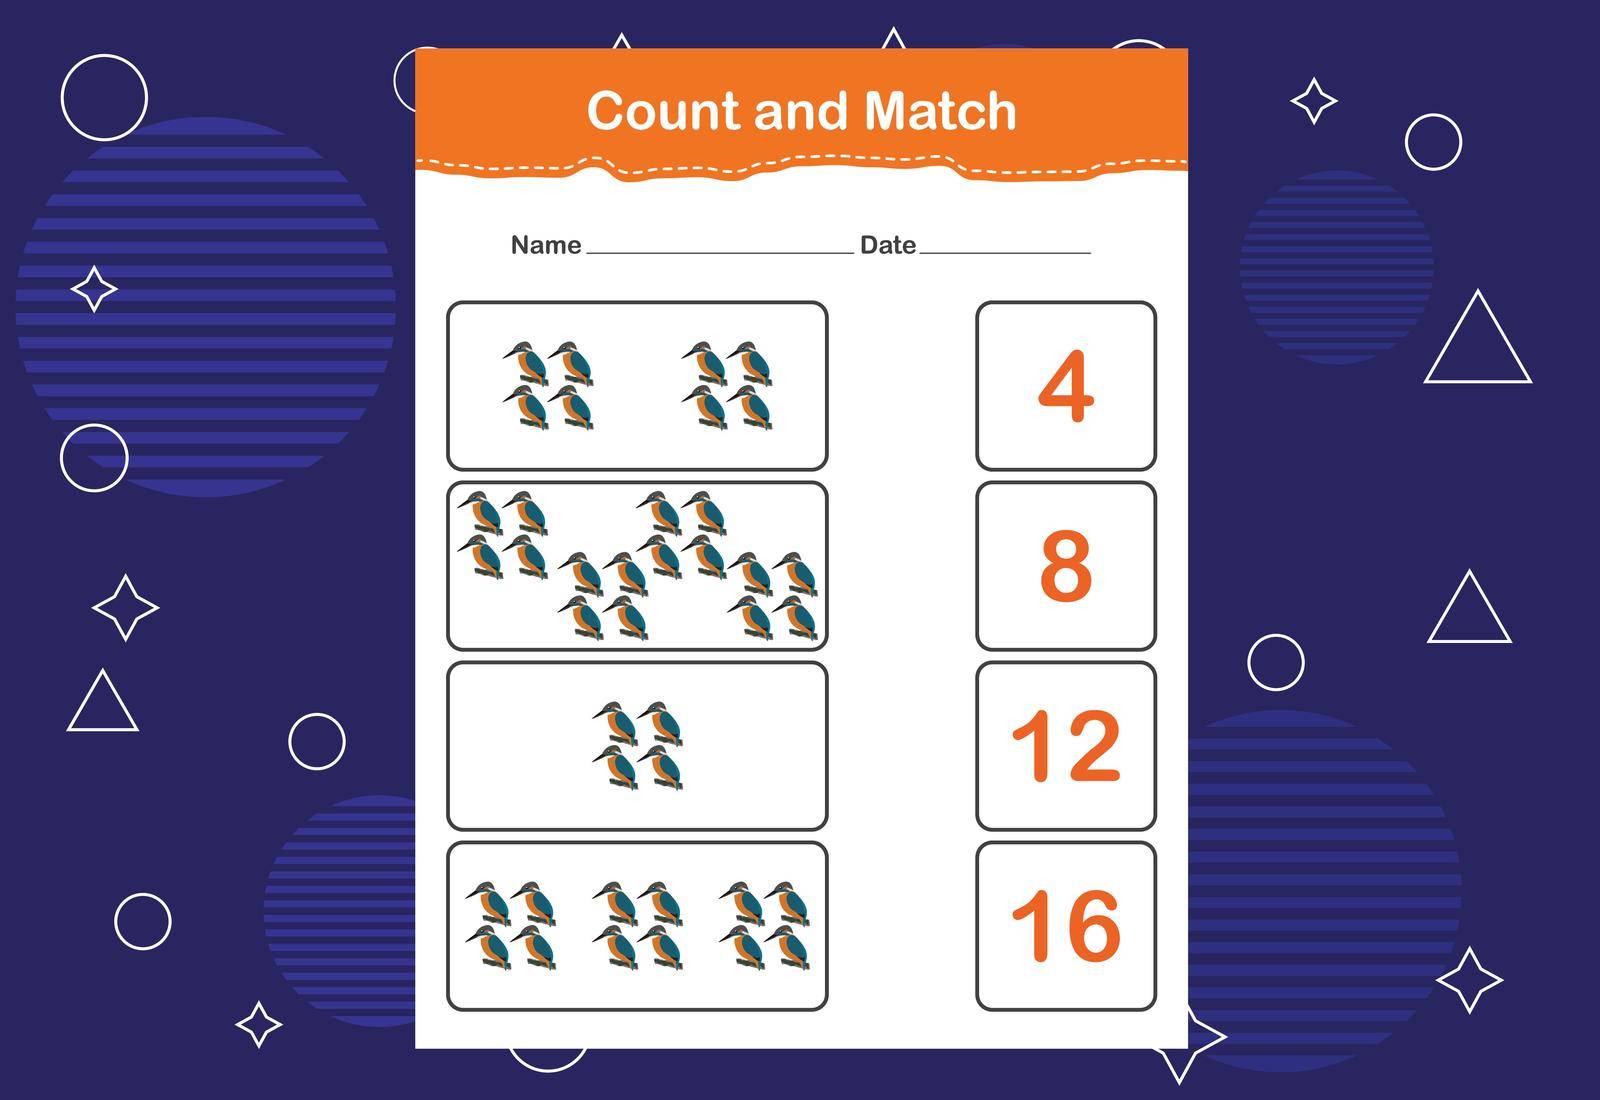 Count and match with the correct number. Count how many birds and choose the correct number by busrat